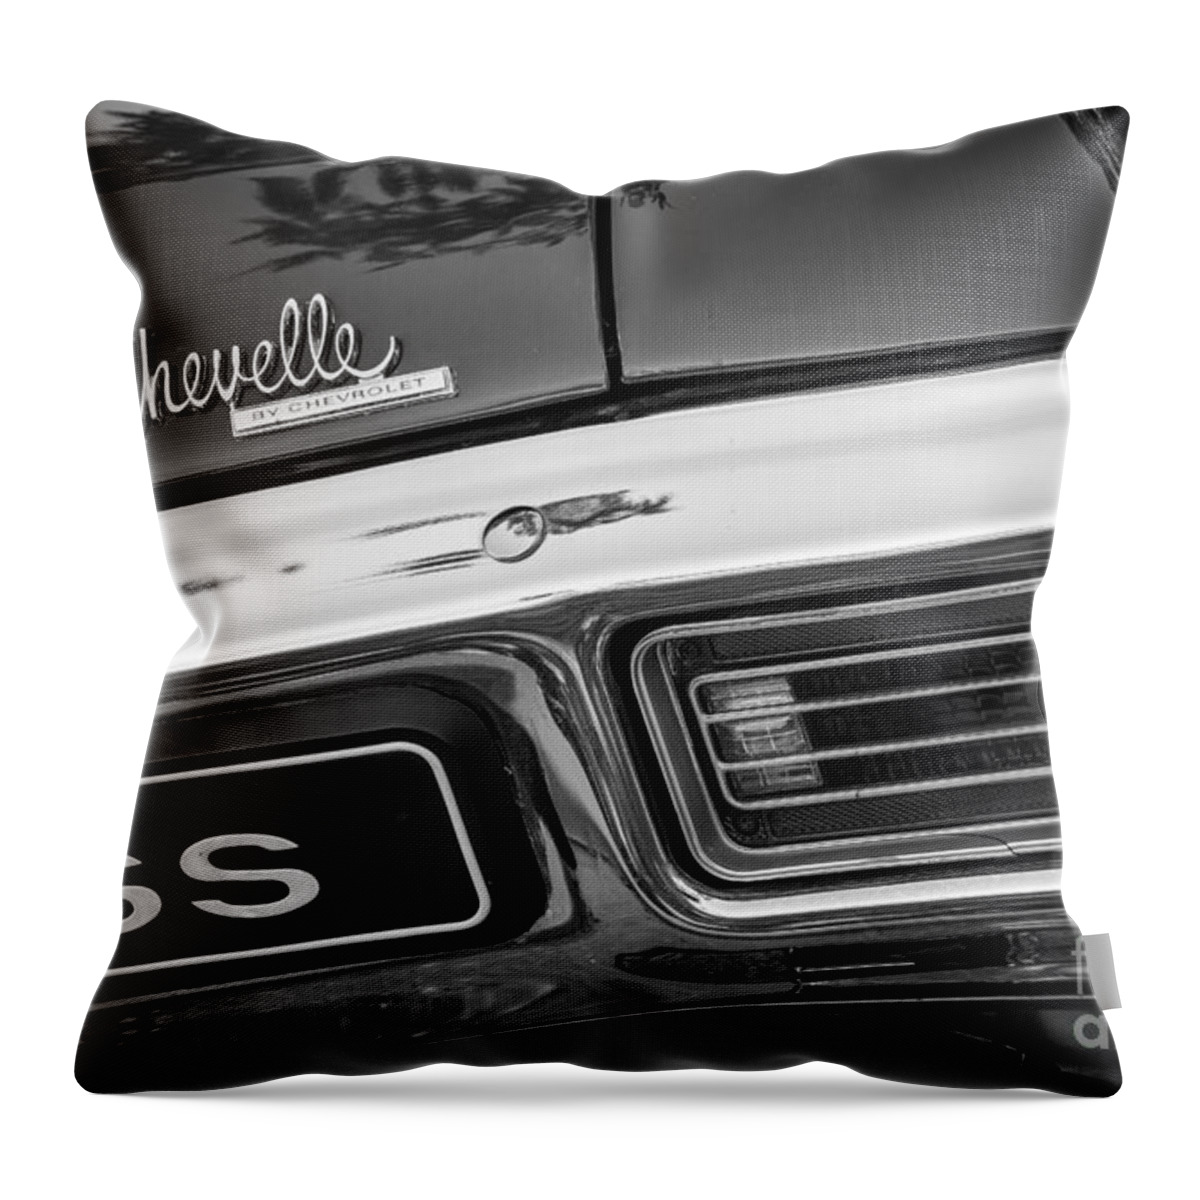 1970 Chevelle Throw Pillow featuring the photograph 1970 Chevelle Super Sport by Dennis Hedberg